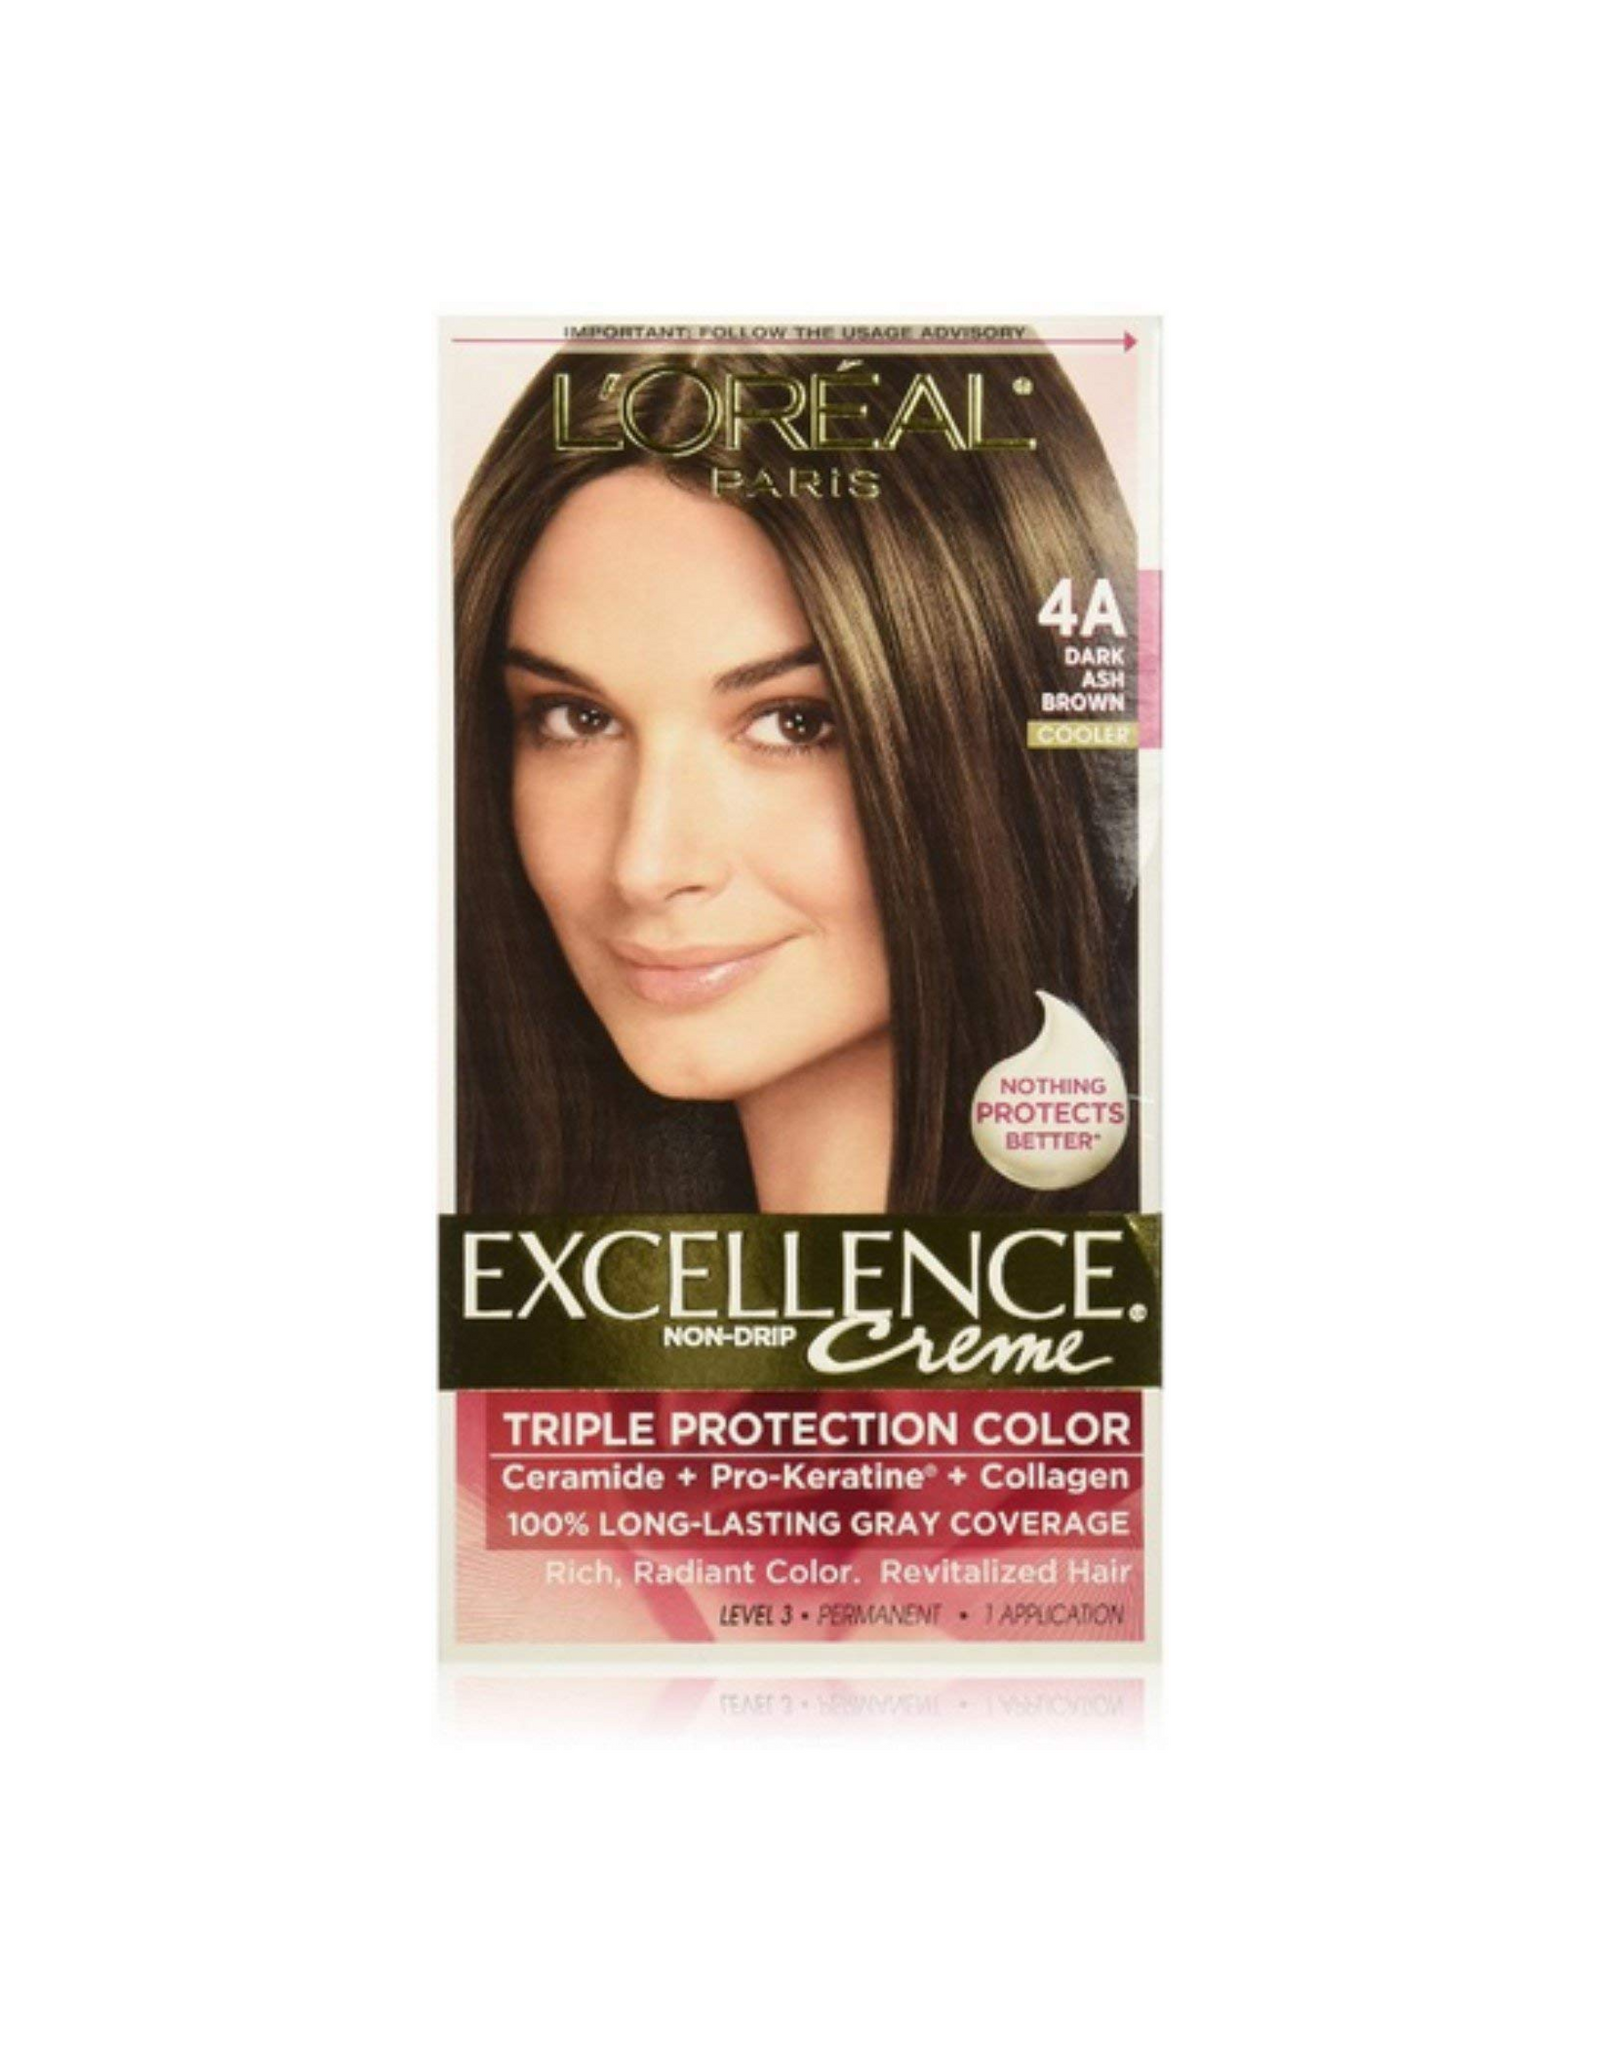 L'Oreal Paris Excellence Creme with Triple Protection Color, 4A Dark Ash Brown, 1 Ct (Pack of 1)